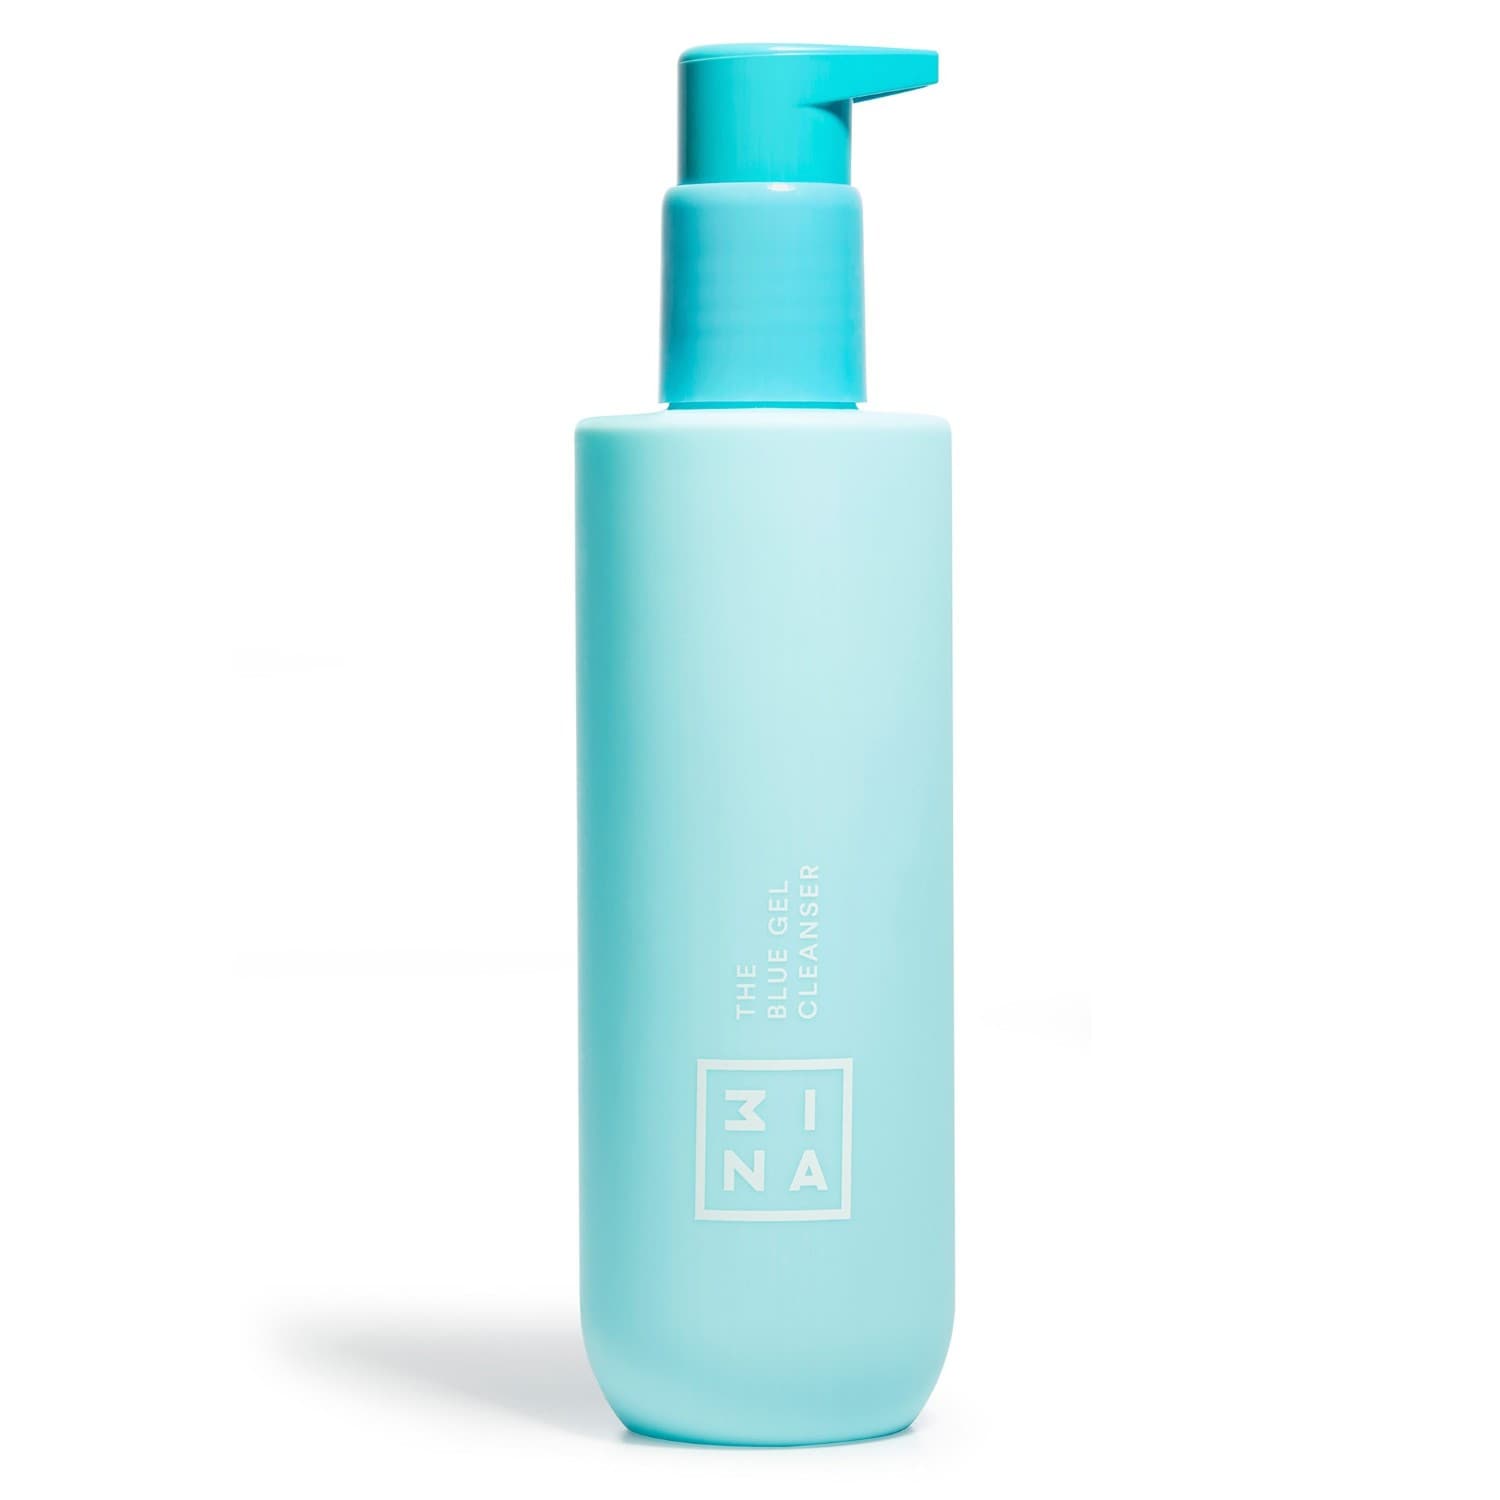 3ina The Blue Gel Cleanser